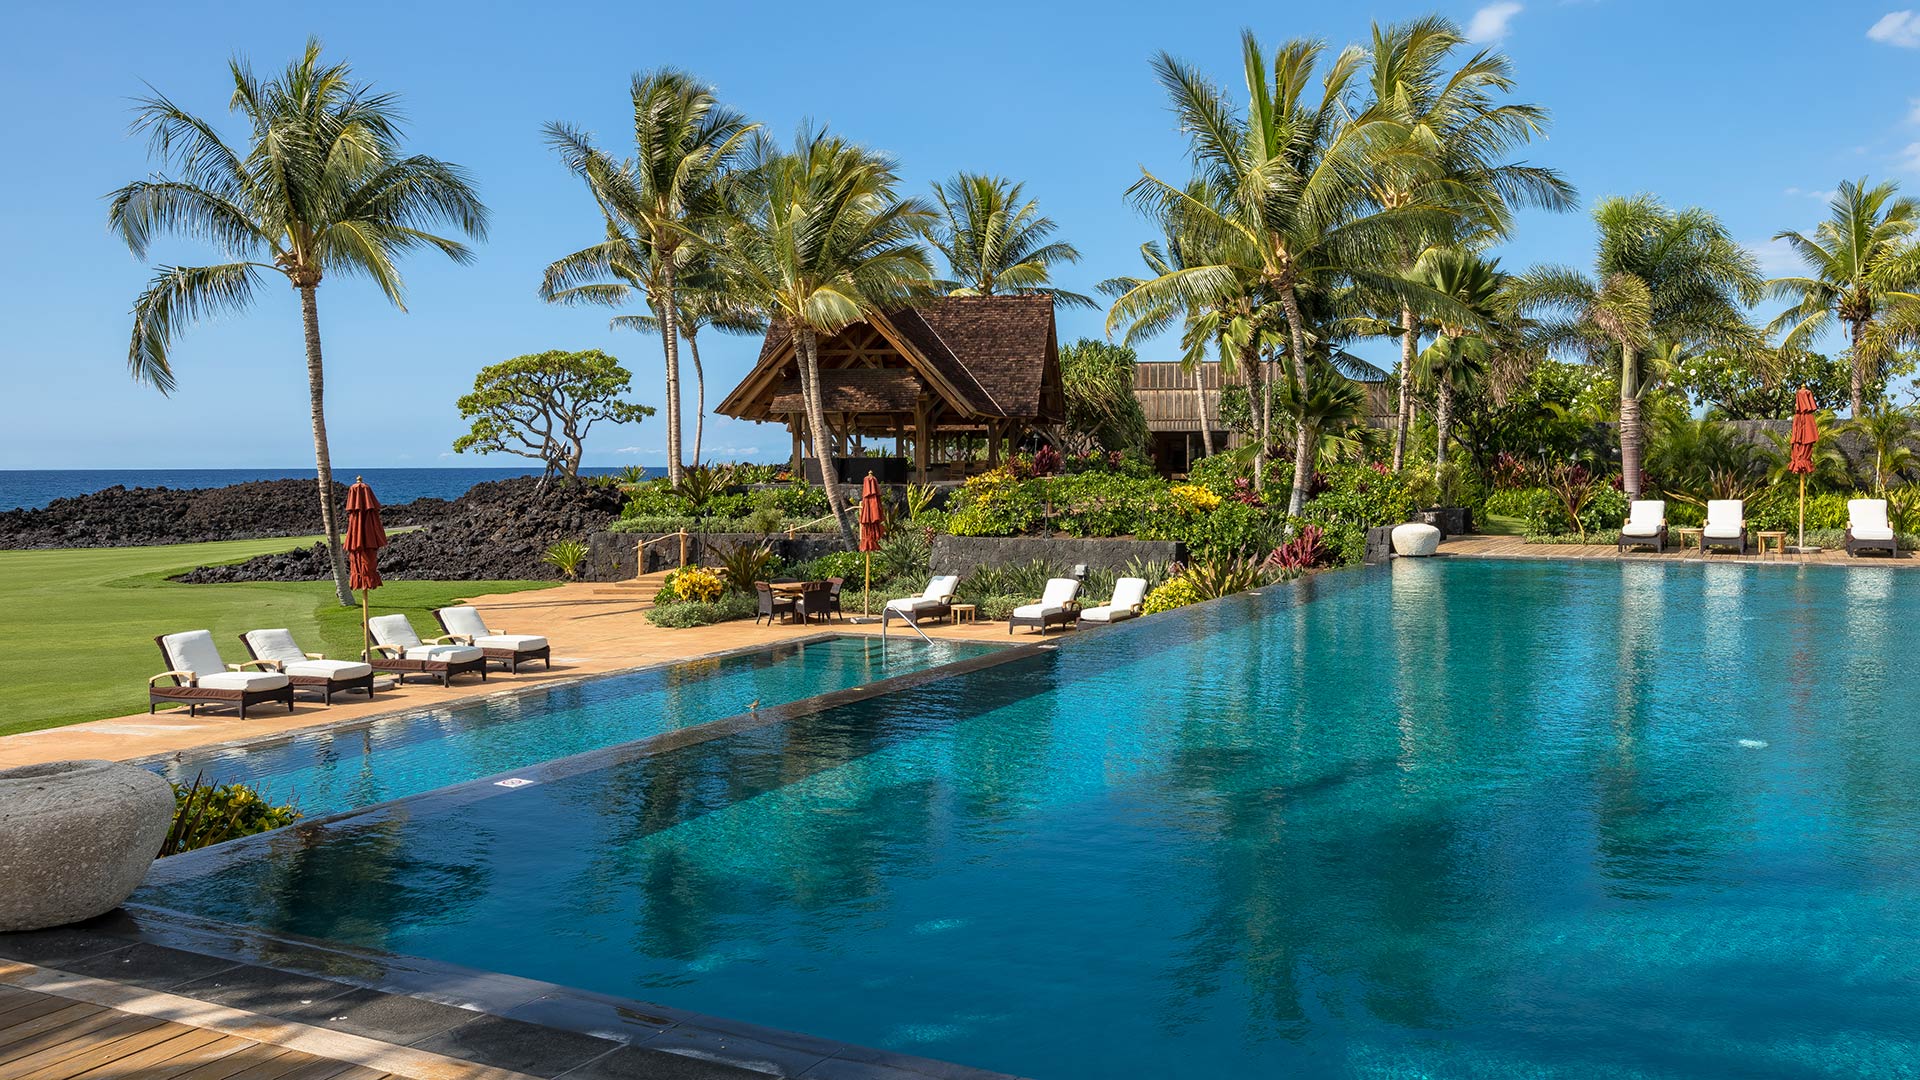 Tranquil waters of the luxury pool, steps from the ocean’s rolling waves